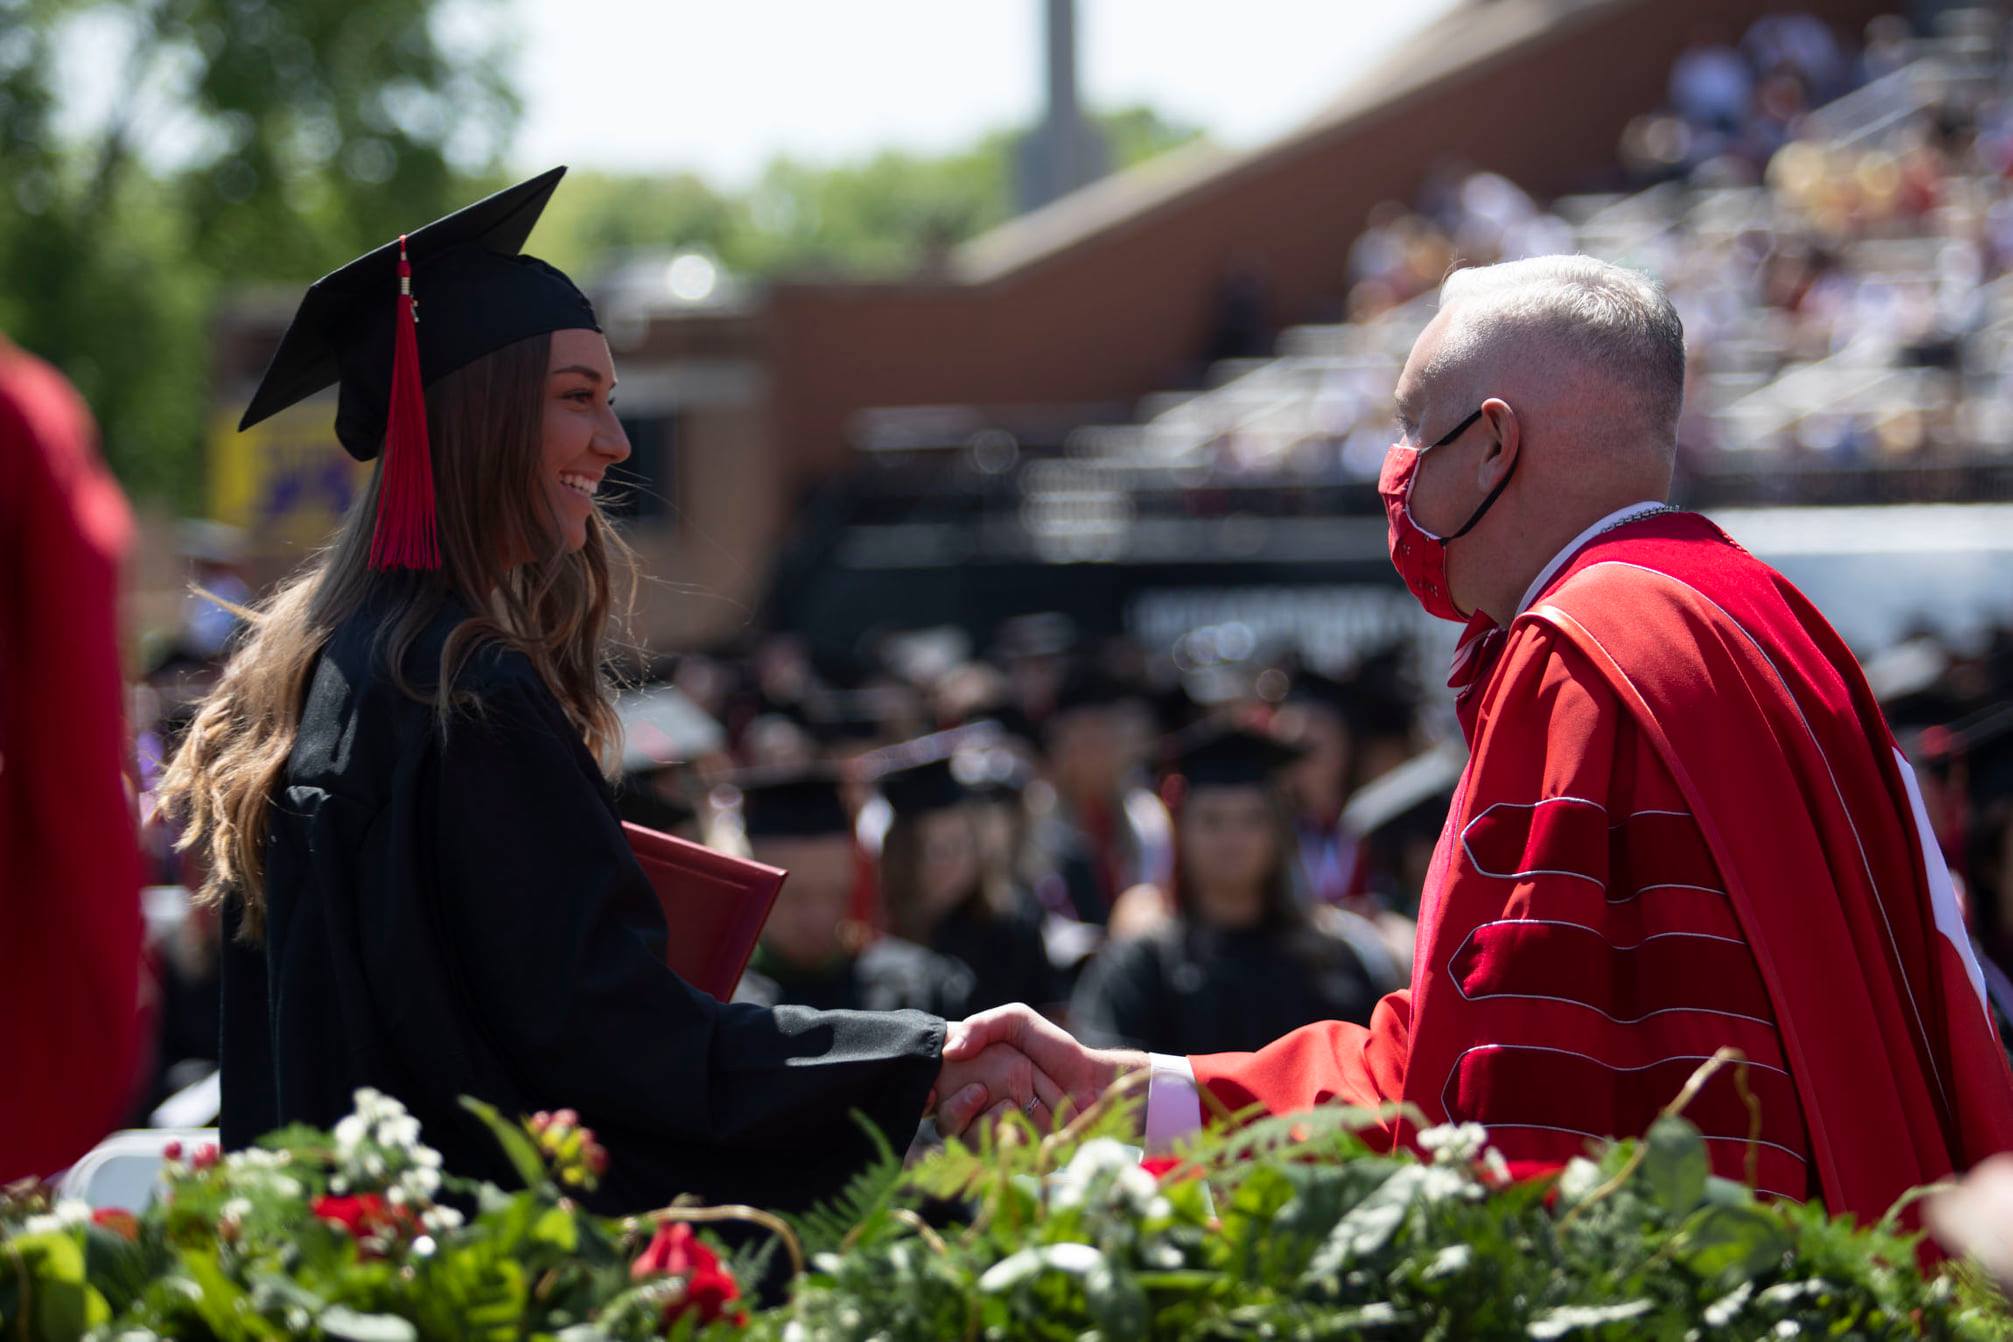 caboni shaking hands with a graduate